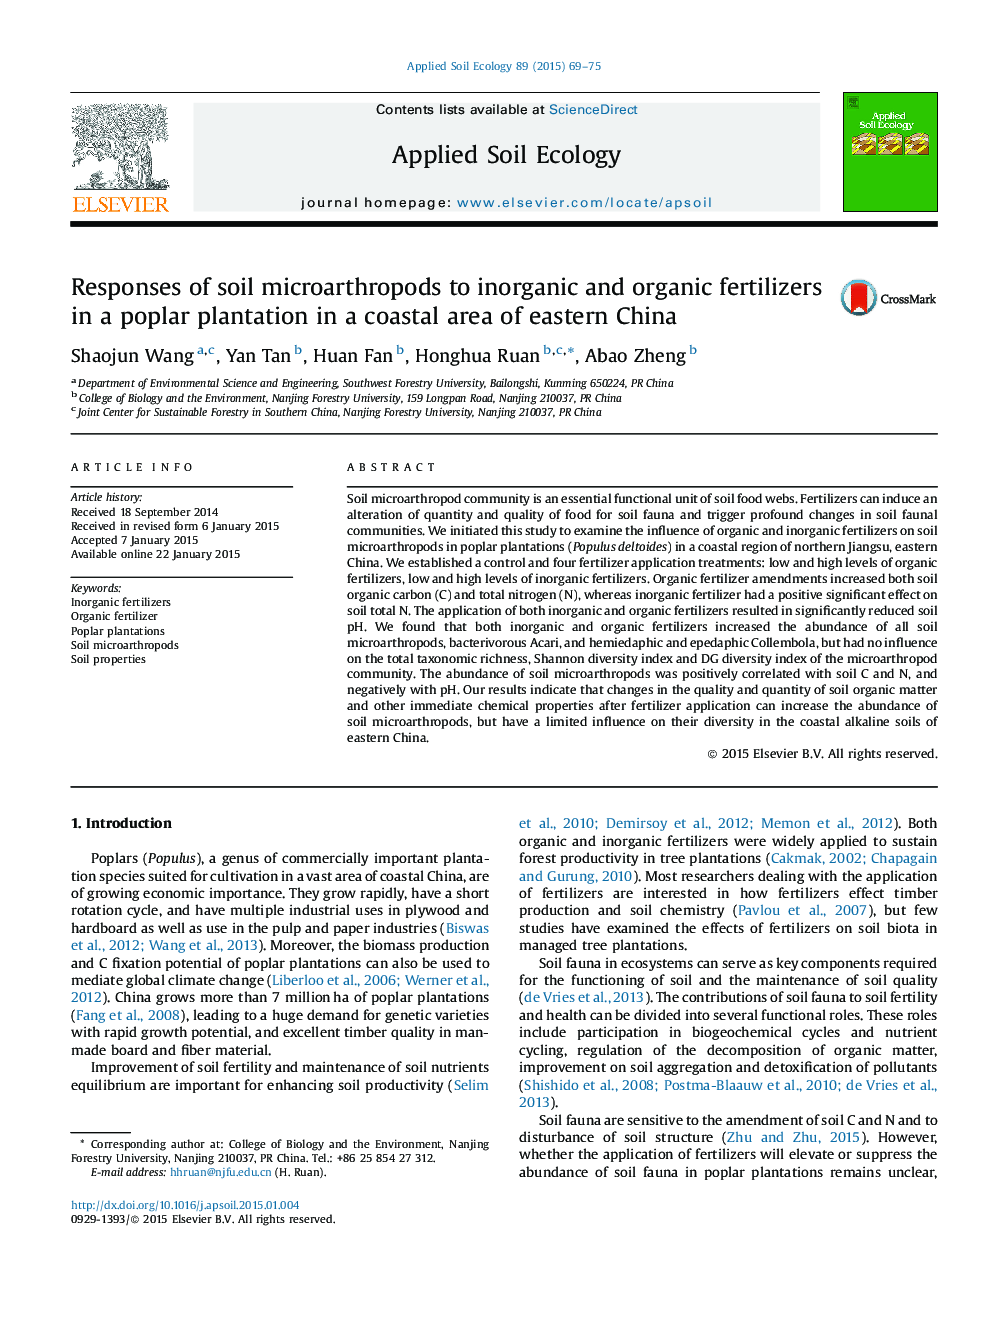 Responses of soil microarthropods to inorganic and organic fertilizers in a poplar plantation in a coastal area of eastern China